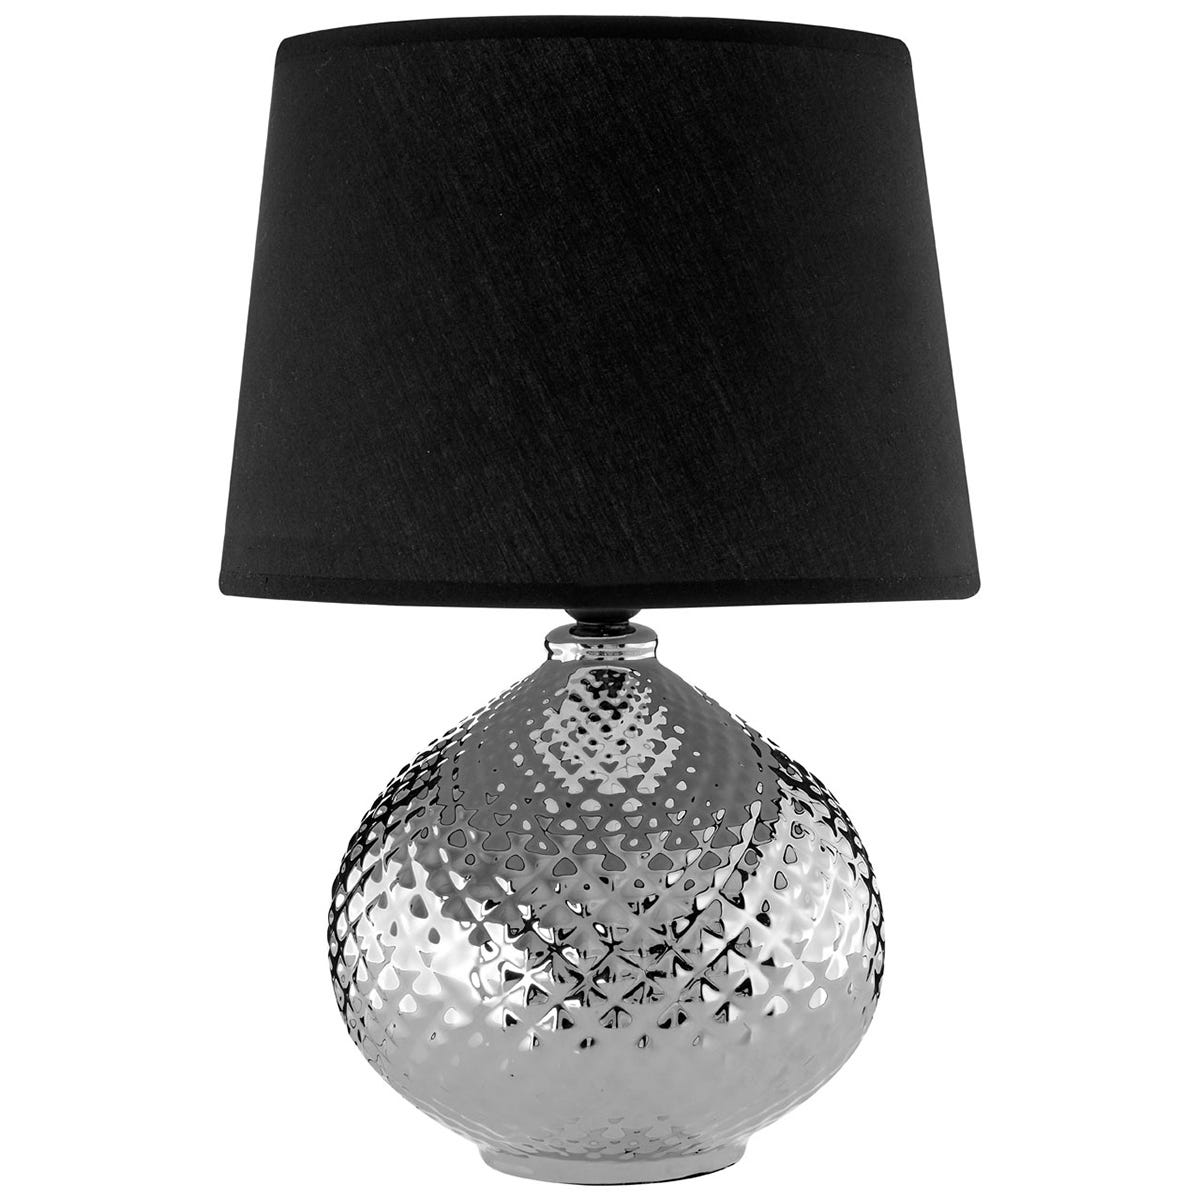 Premier Housewares Hetty Table Lamp in Ceramic Silver with Black Shade